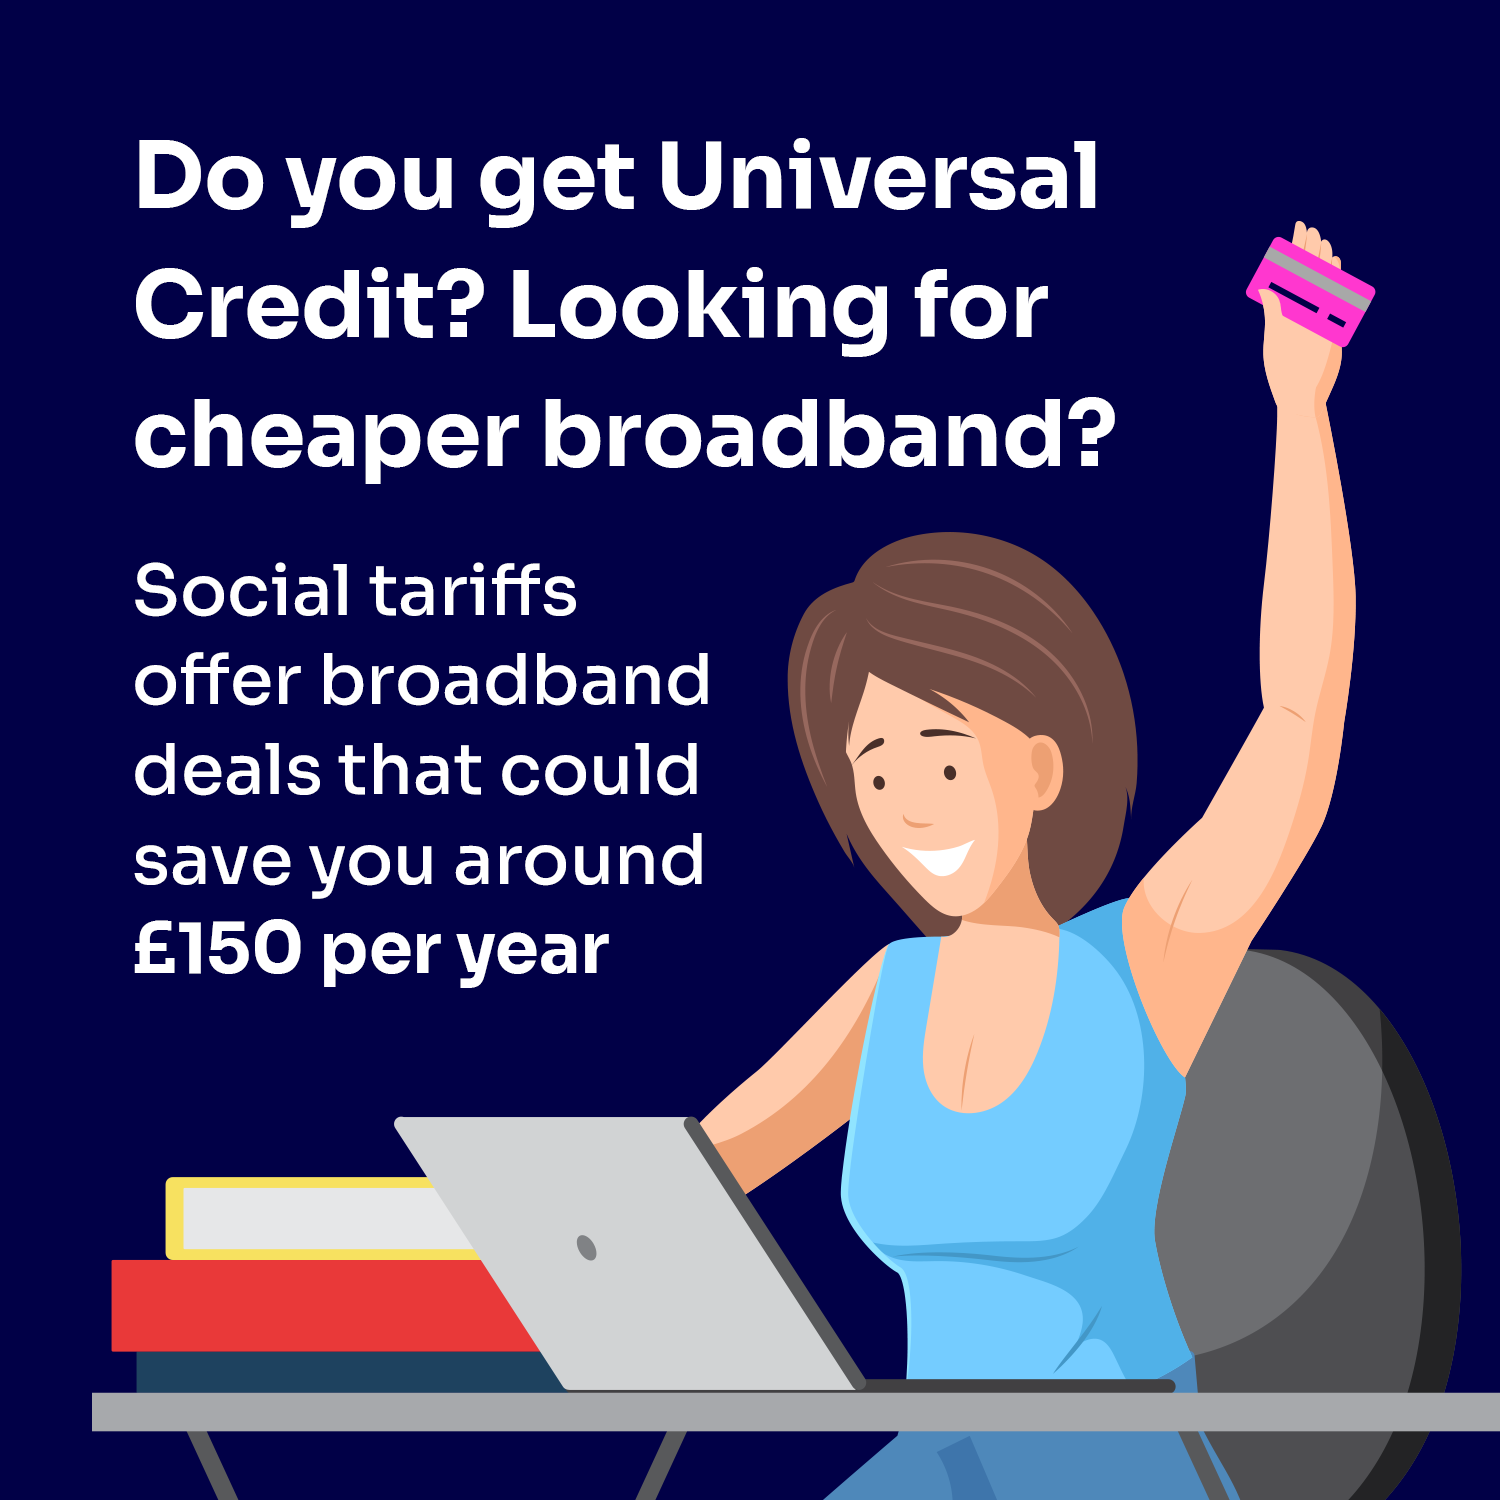 Do you get universal credit